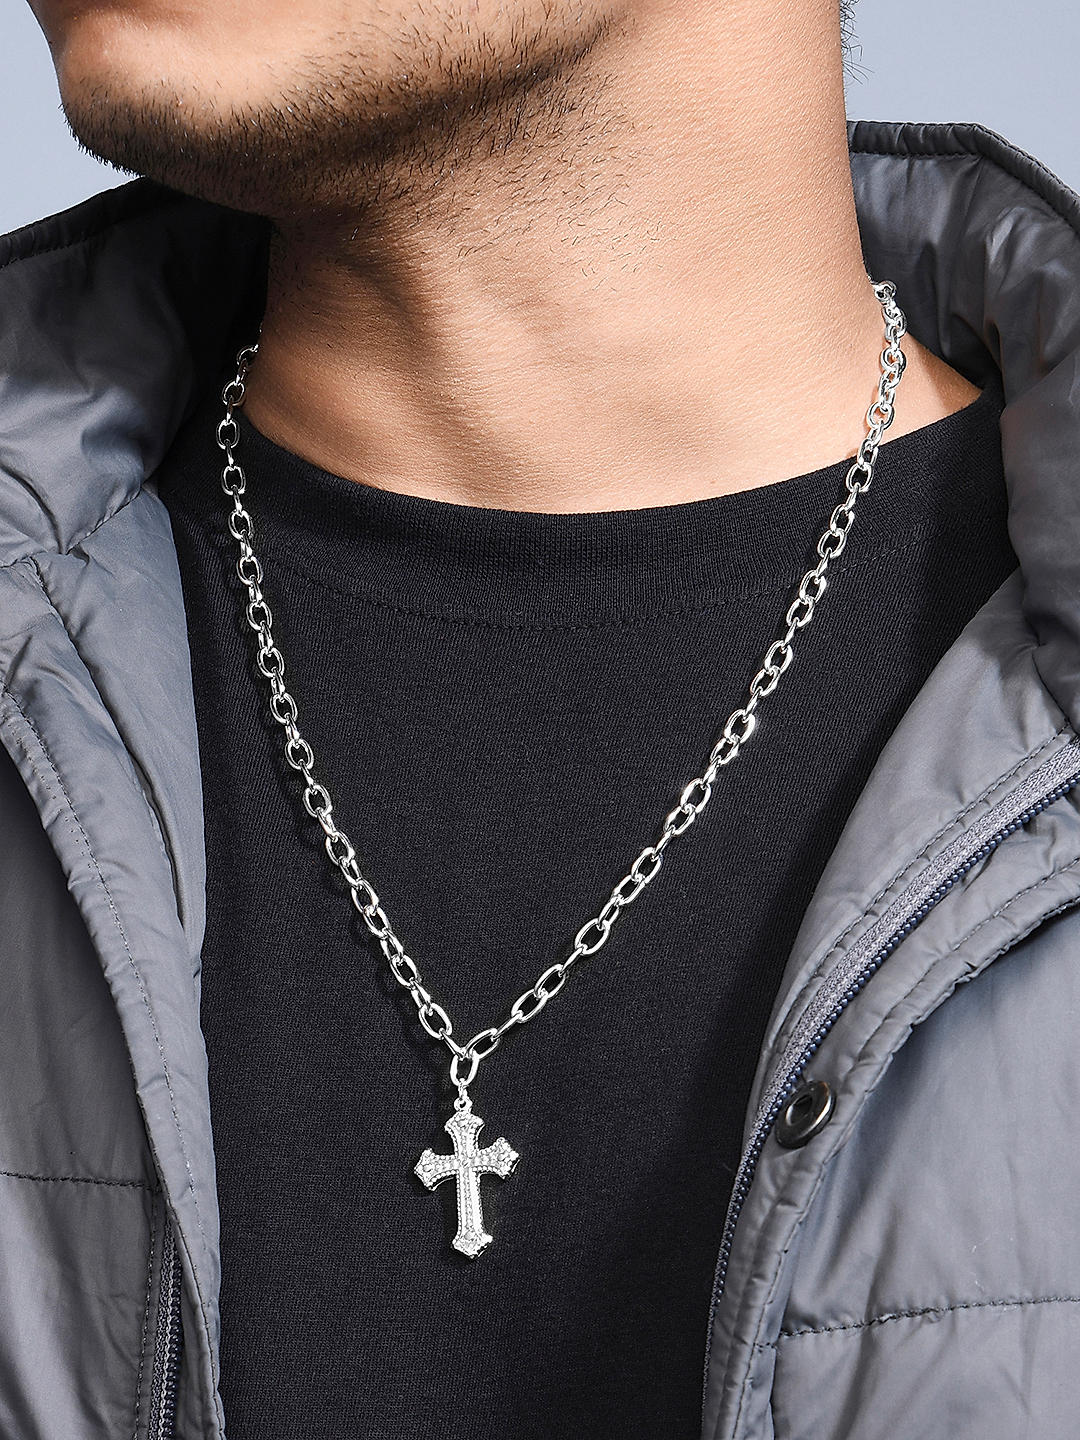 Mens Irish Celtic Knot Cross Pendant Necklace Stainless Steel Chain Silver  Gift | eBay